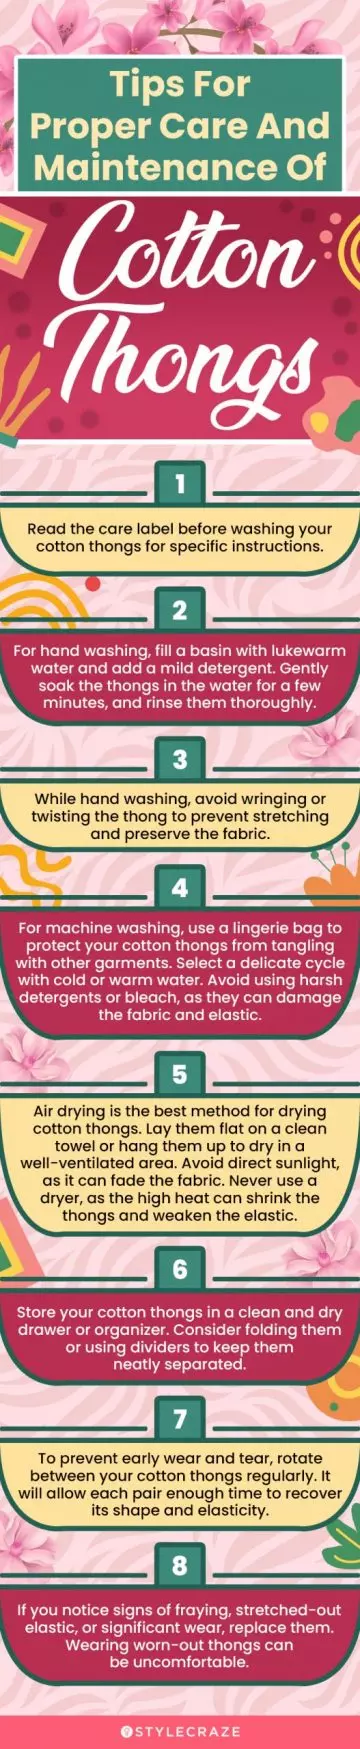 Tips For Proper Care And Maintenance Of Cotton Thongs (infographic)